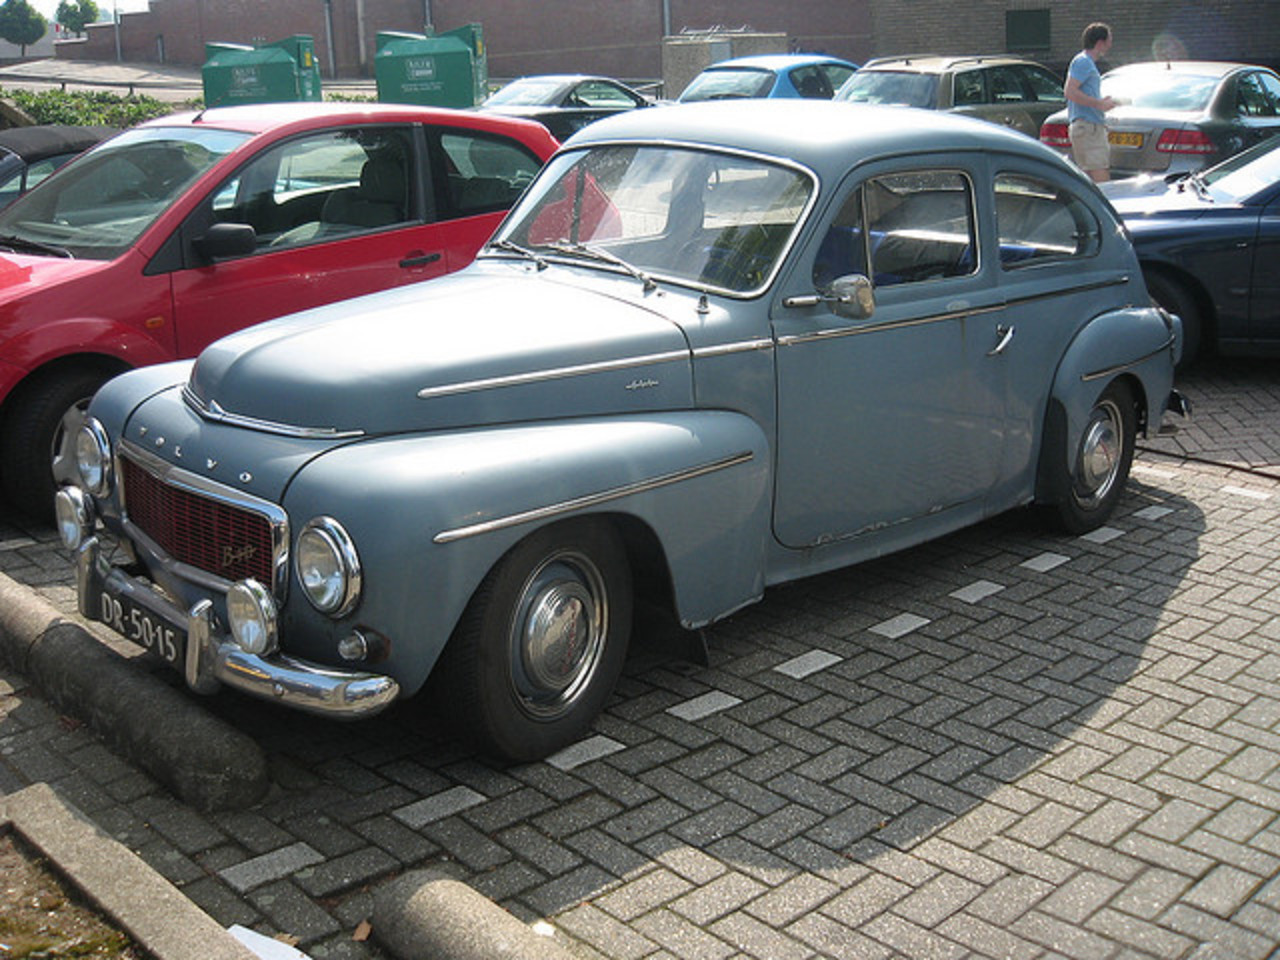 DR-50-15 Volvo P544 1961 by Wouter Duijndam